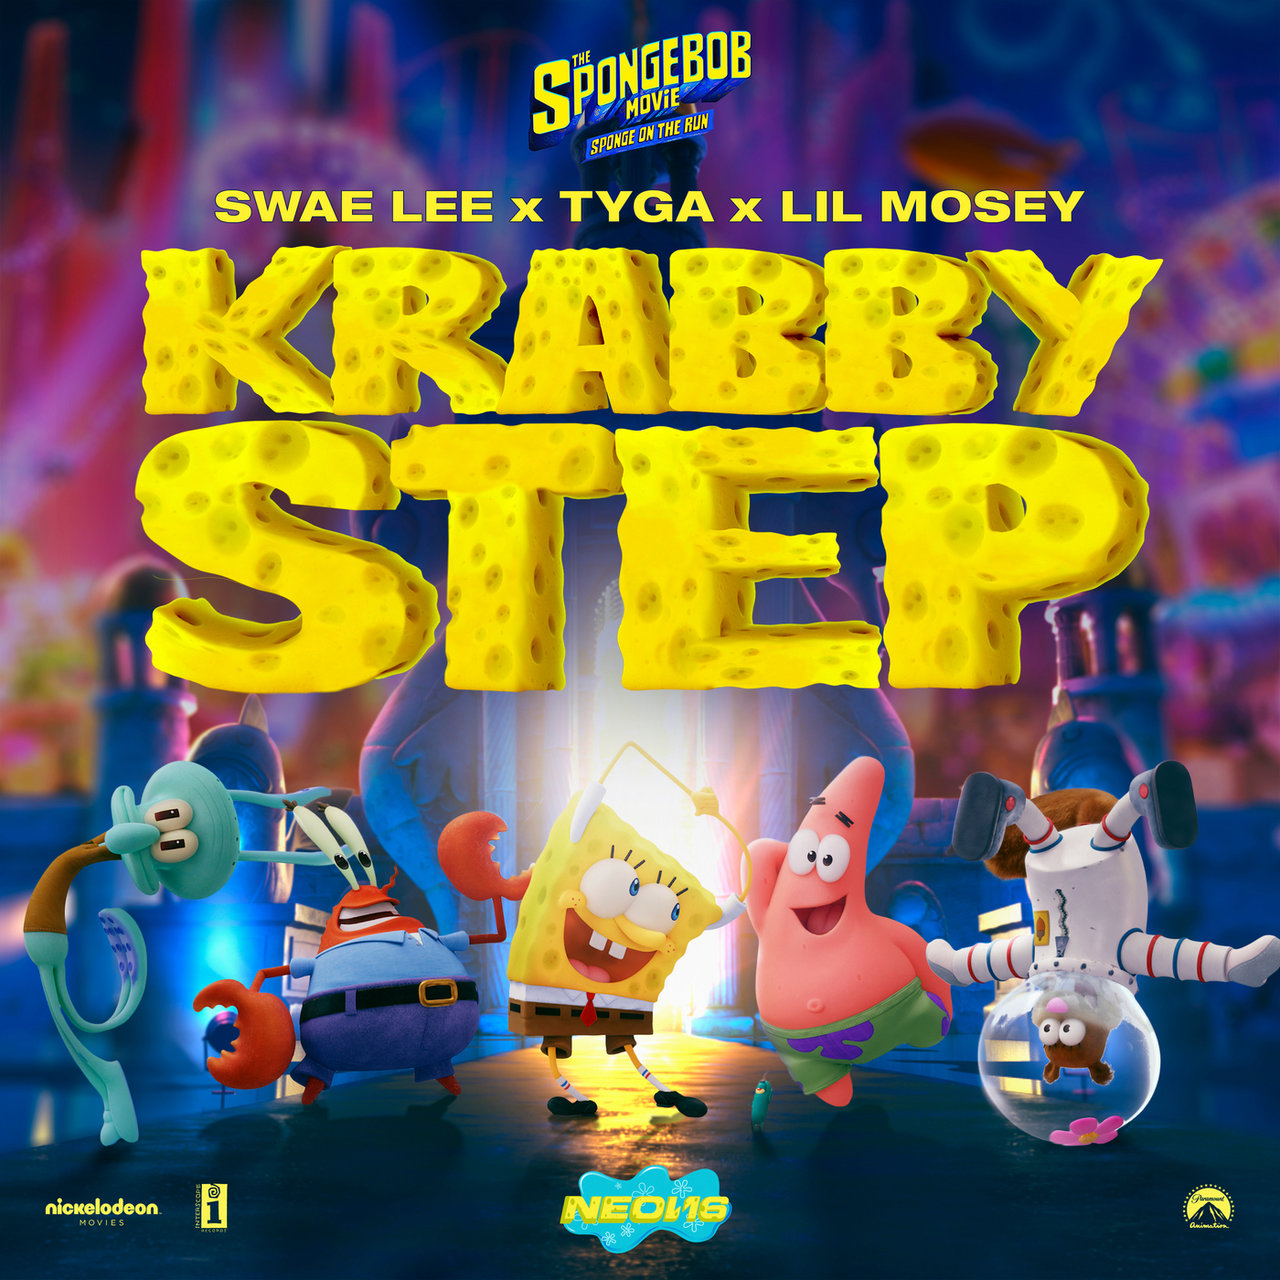 Swae Lee, Tyga and Lil Mosey - Krabby Step (Cover)